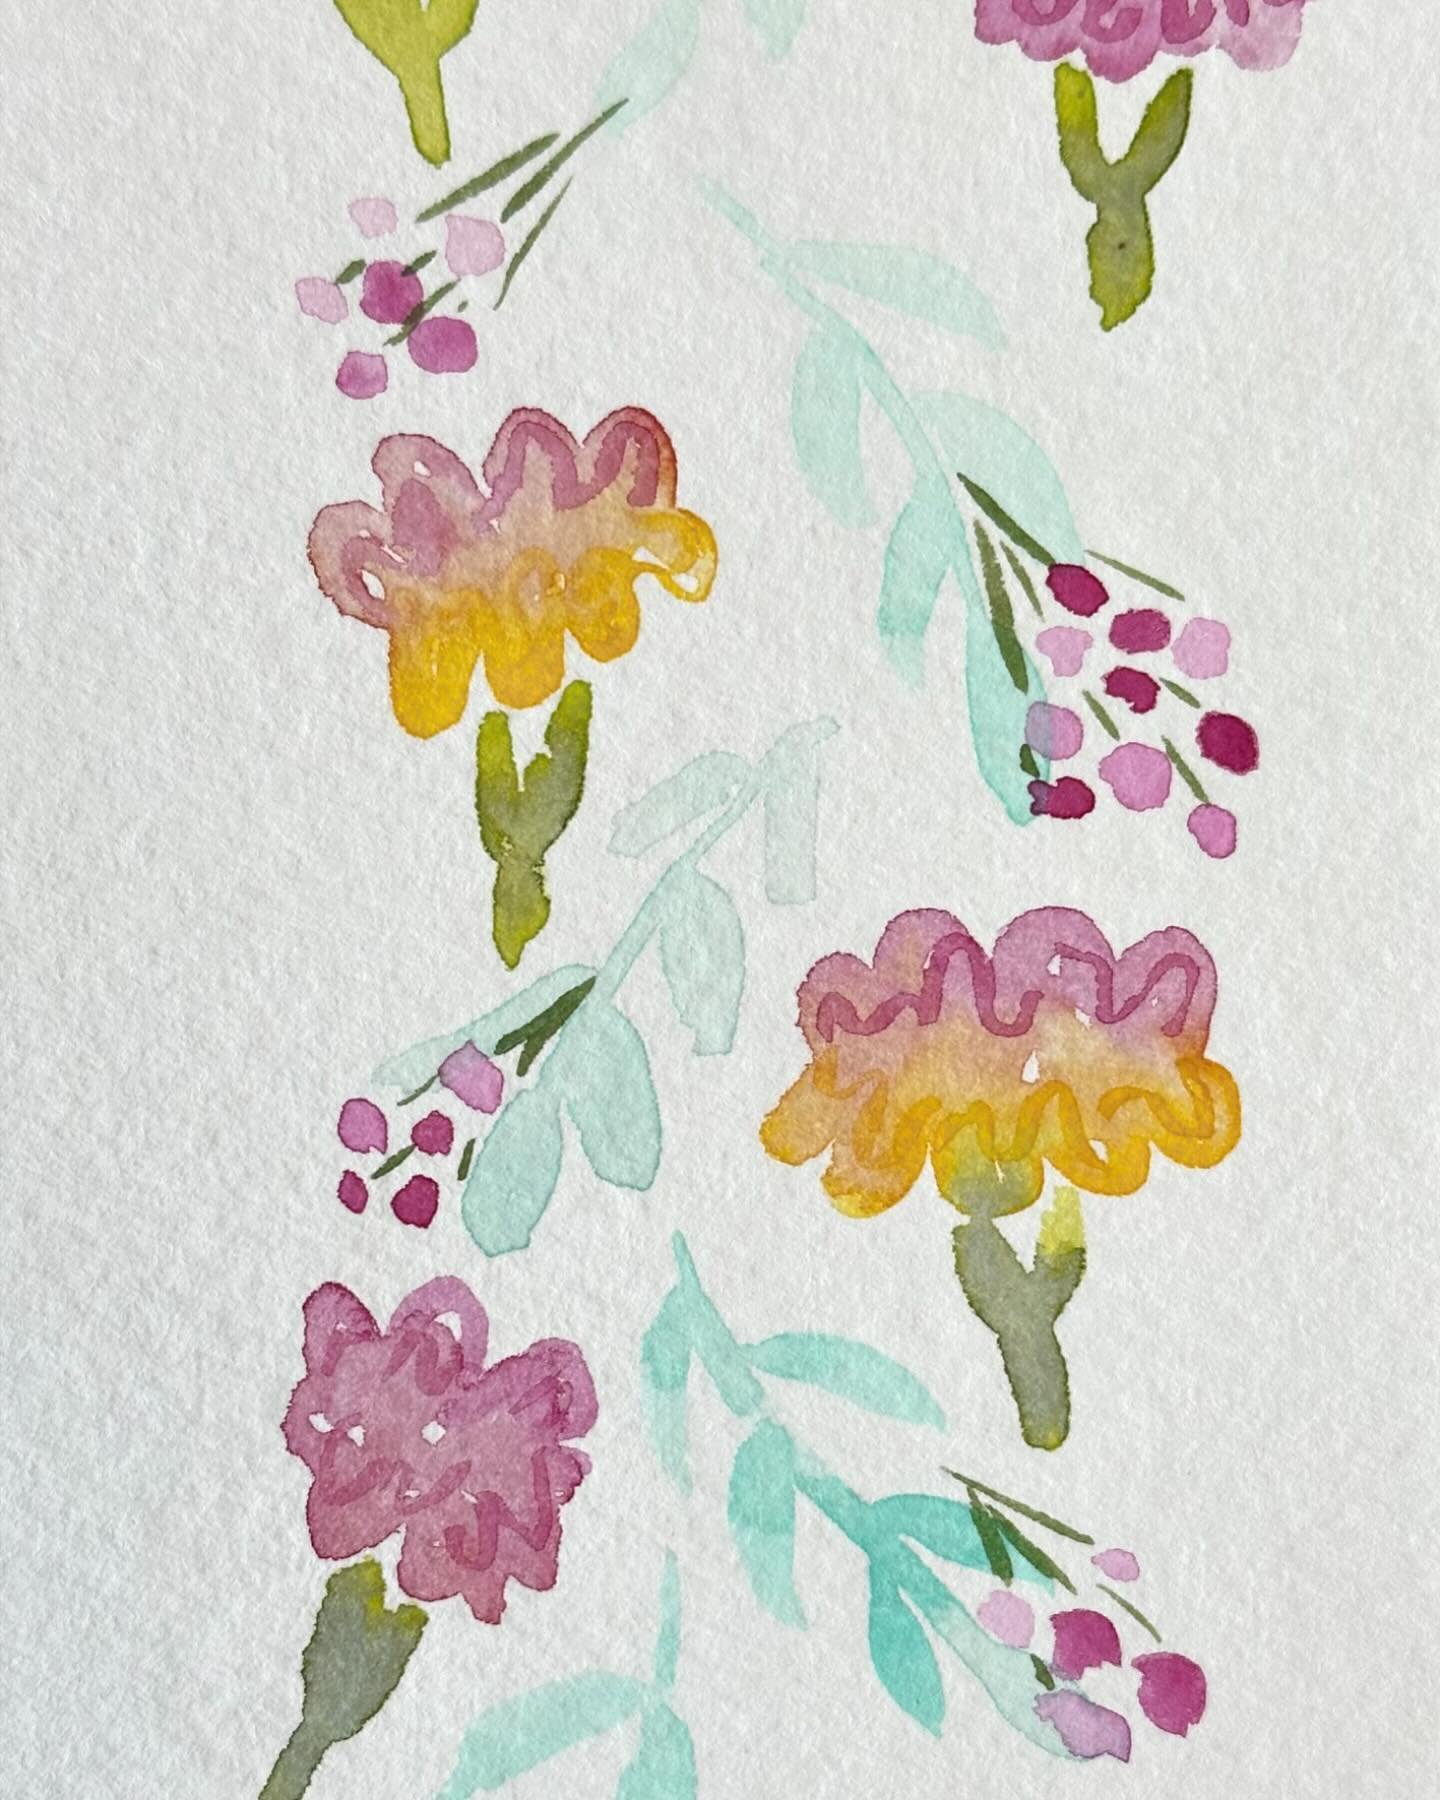 A postcard of watercolor flowers I painted from the book DIY Watercolor Flowers. 

#letsmakeartwatercolor #letsmakeart #watercolor #watercolorpainting